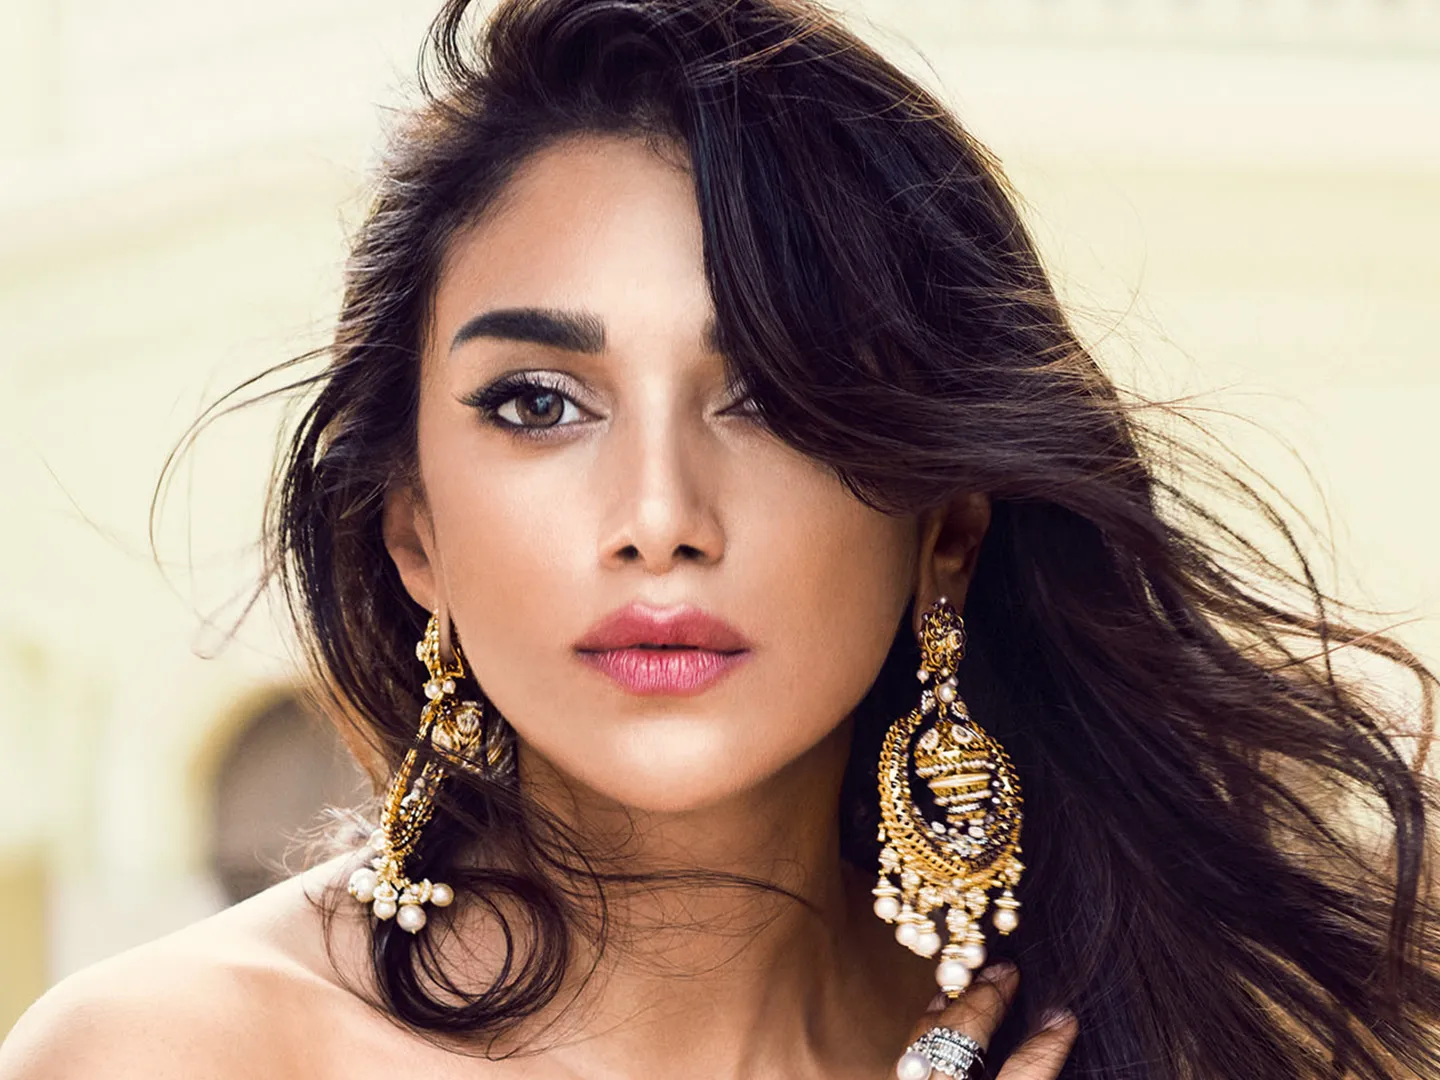 Indias-best-bridal-makeup-artists-based-on-the-city-you-live-in-vogue-india